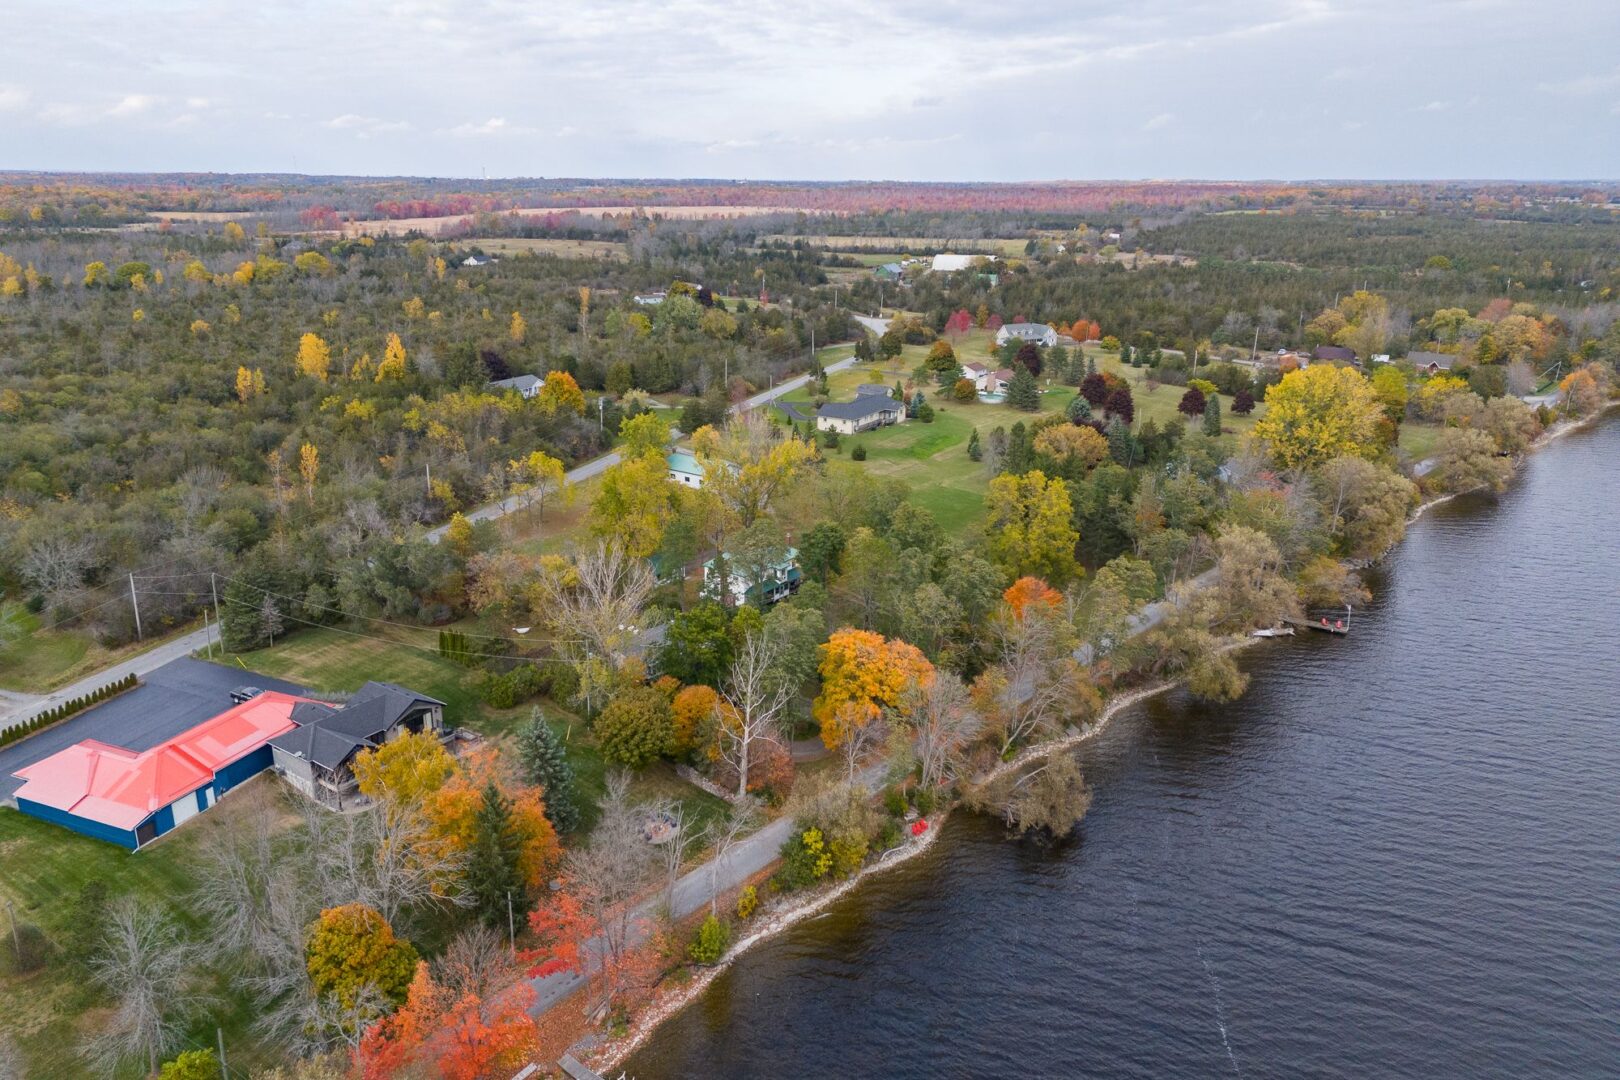 Overhead view of a green stretch of land along a lake, with a few houses lining the waterfront.